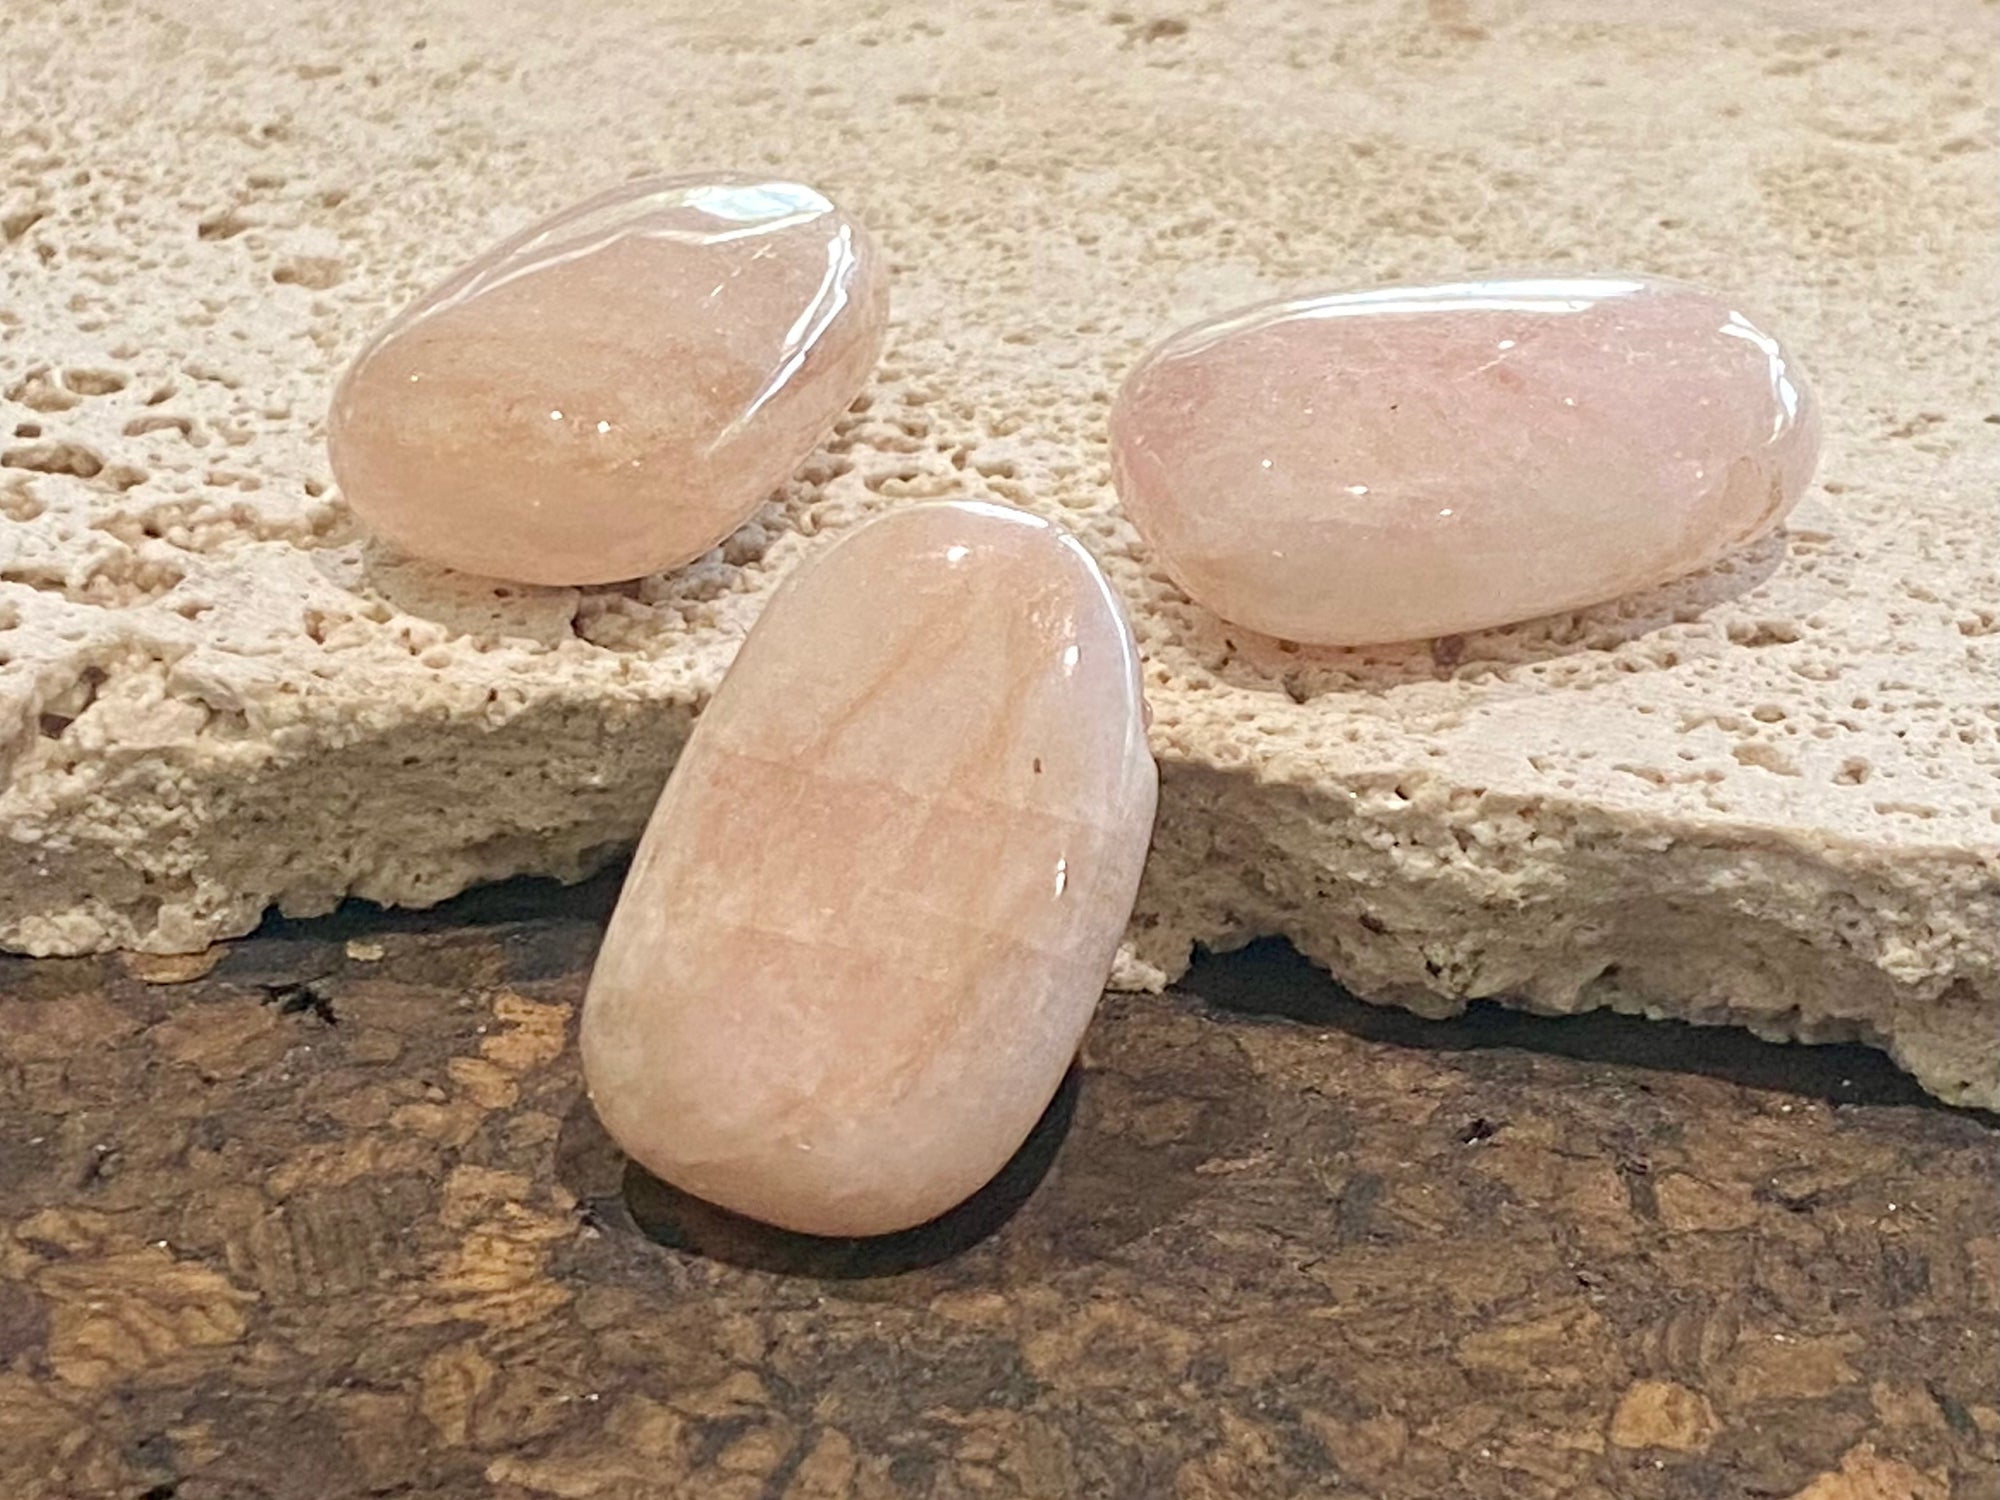 Simple organic pendants carved from single morganite crystals. Drilled through at the top for the placement of a chain or cord.  Suitable as men or women's pendants.  Approximate height 3 cm x width 2 cm